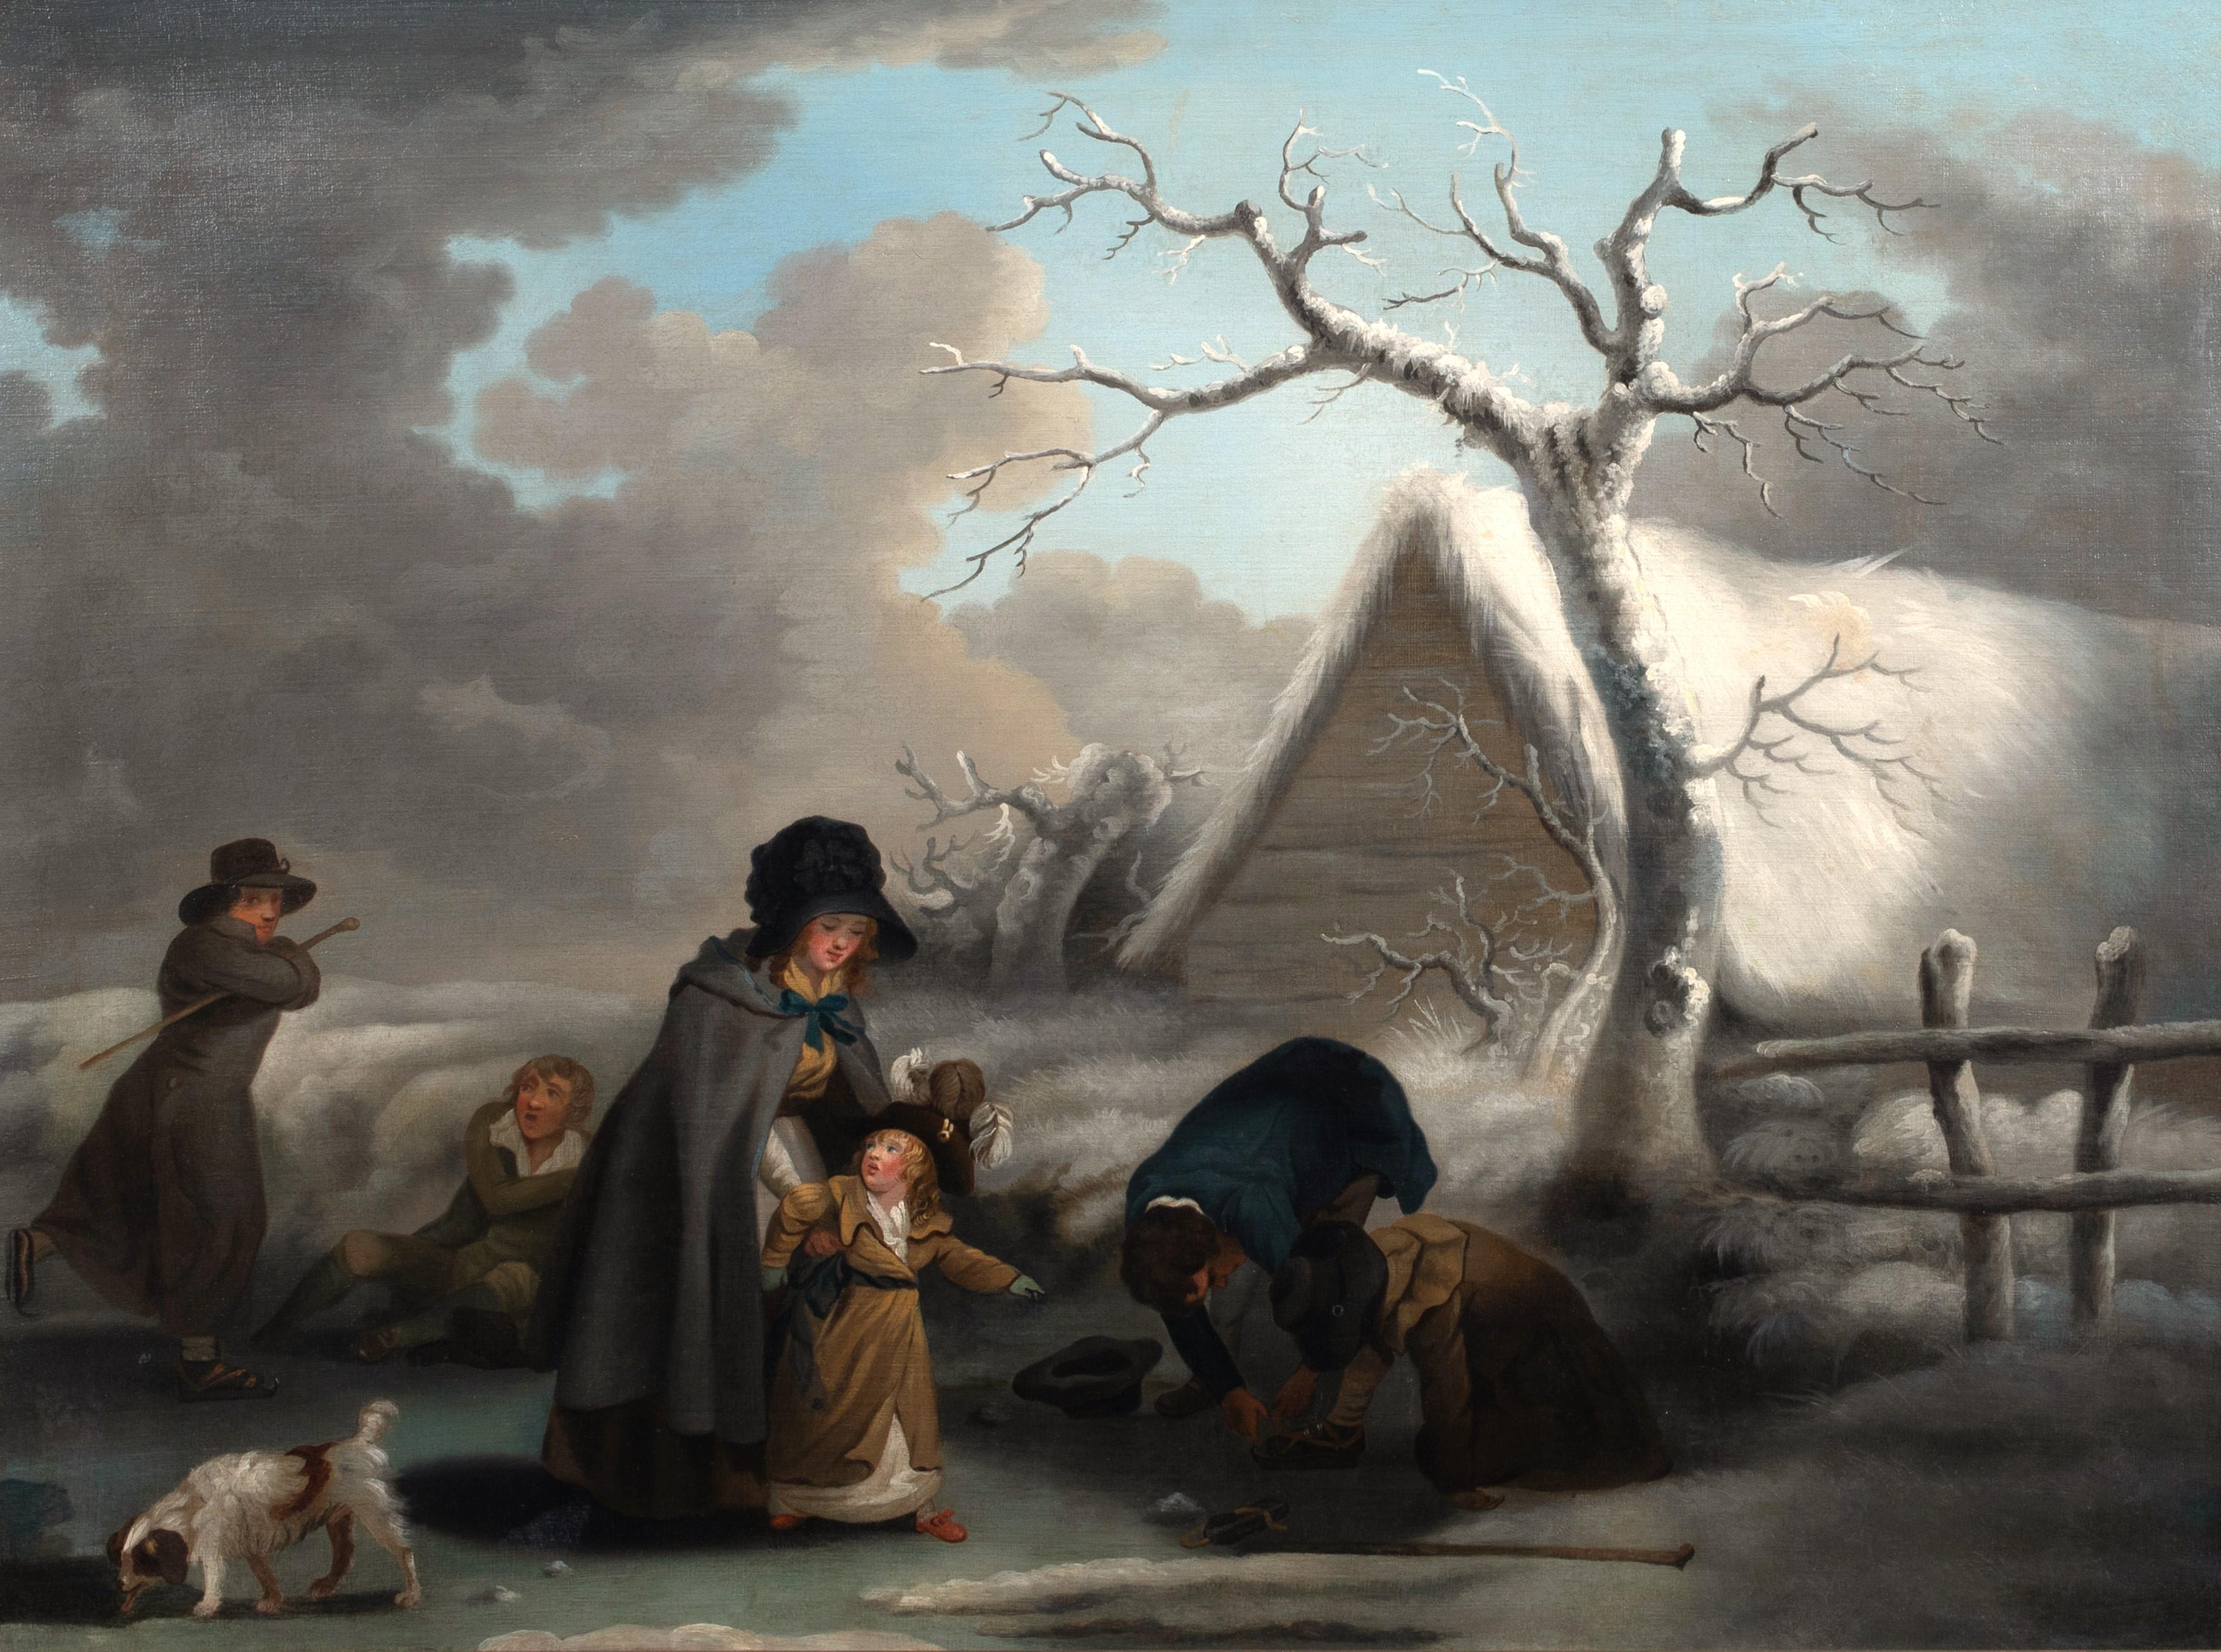 Ice Skating In A Winter Landscape, 18th Century   - Black Portrait Painting by George Morland